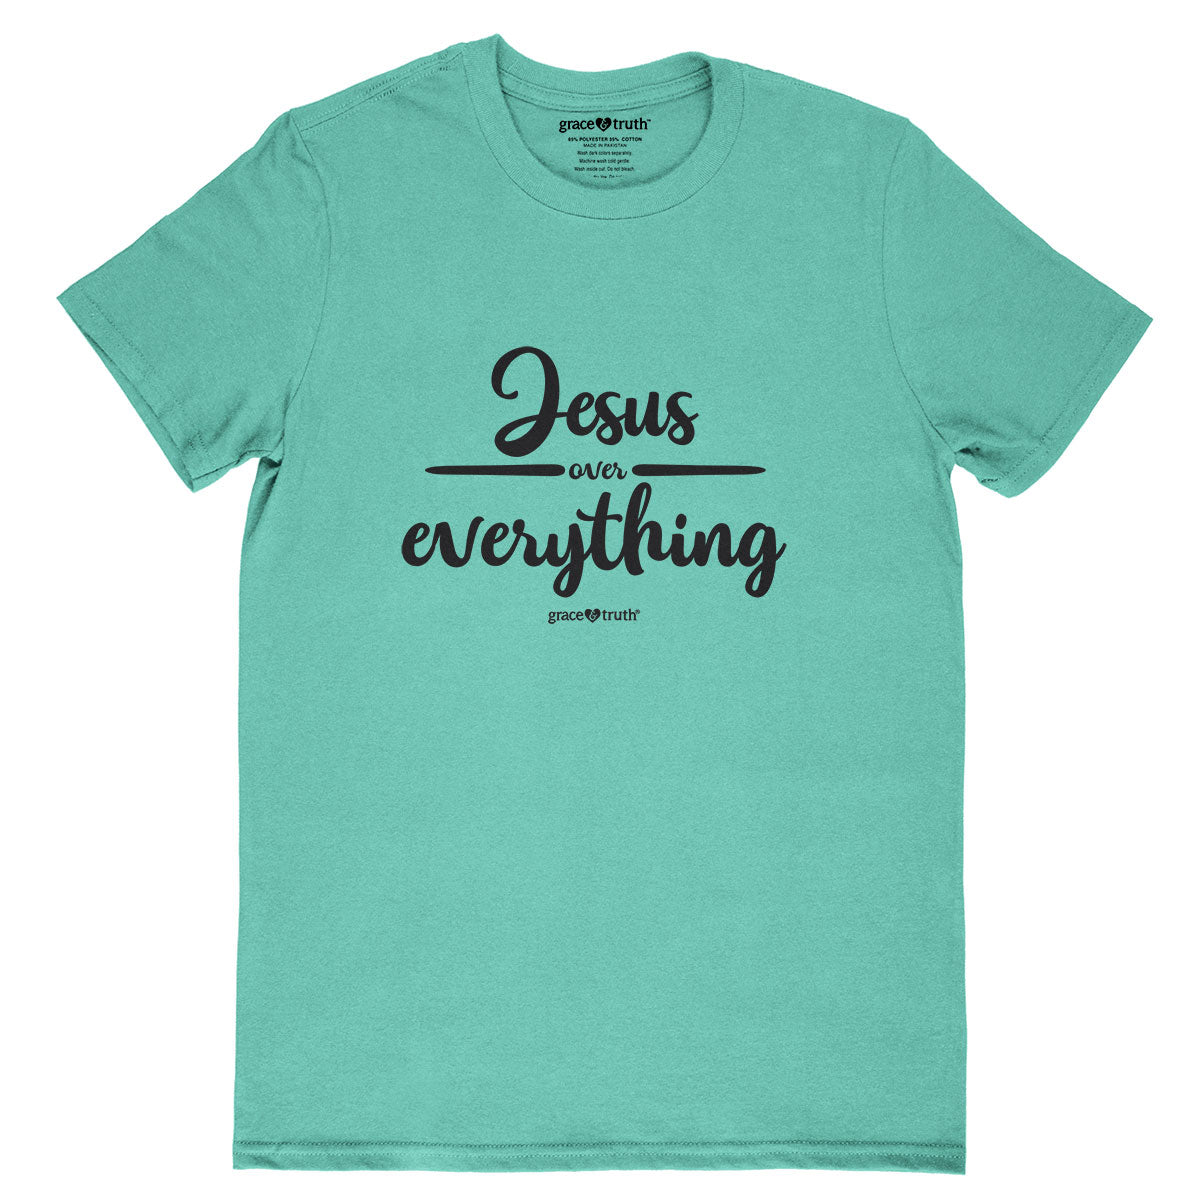 grace & truth Womens T-Shirt Jesus Over Everything